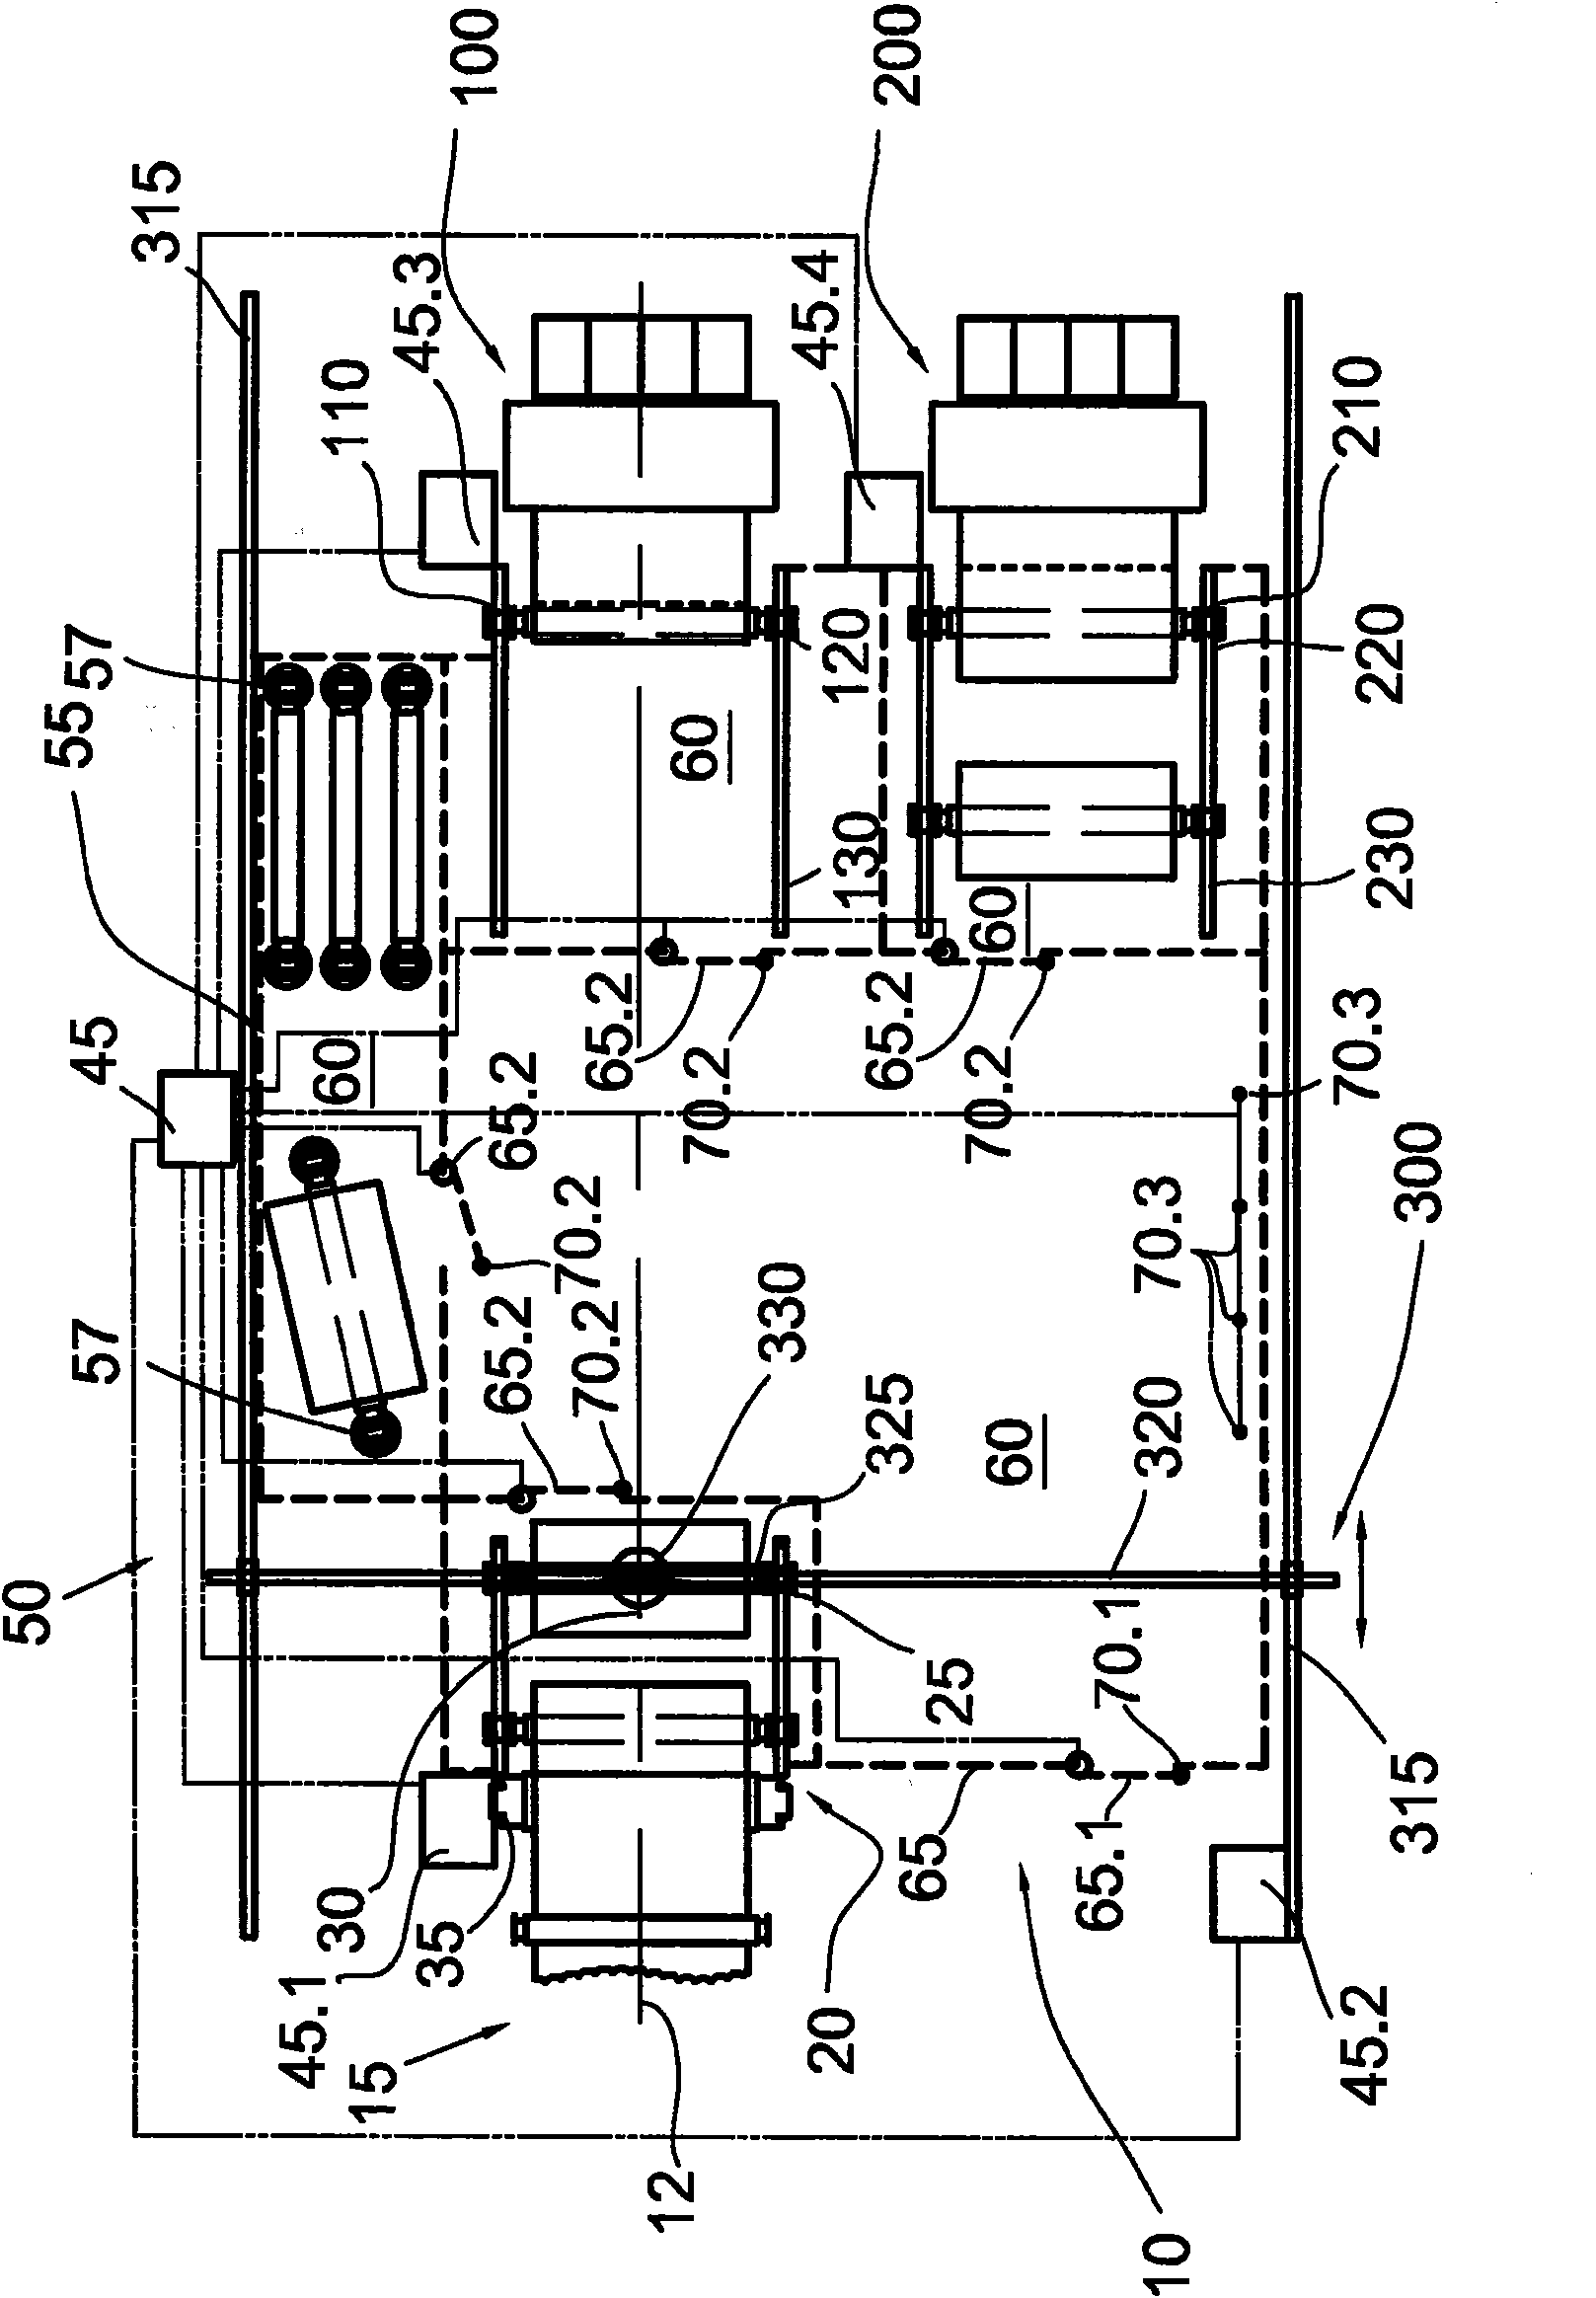 Fiber web handling and/or production line and method in connection with fiber web handling and/or production line